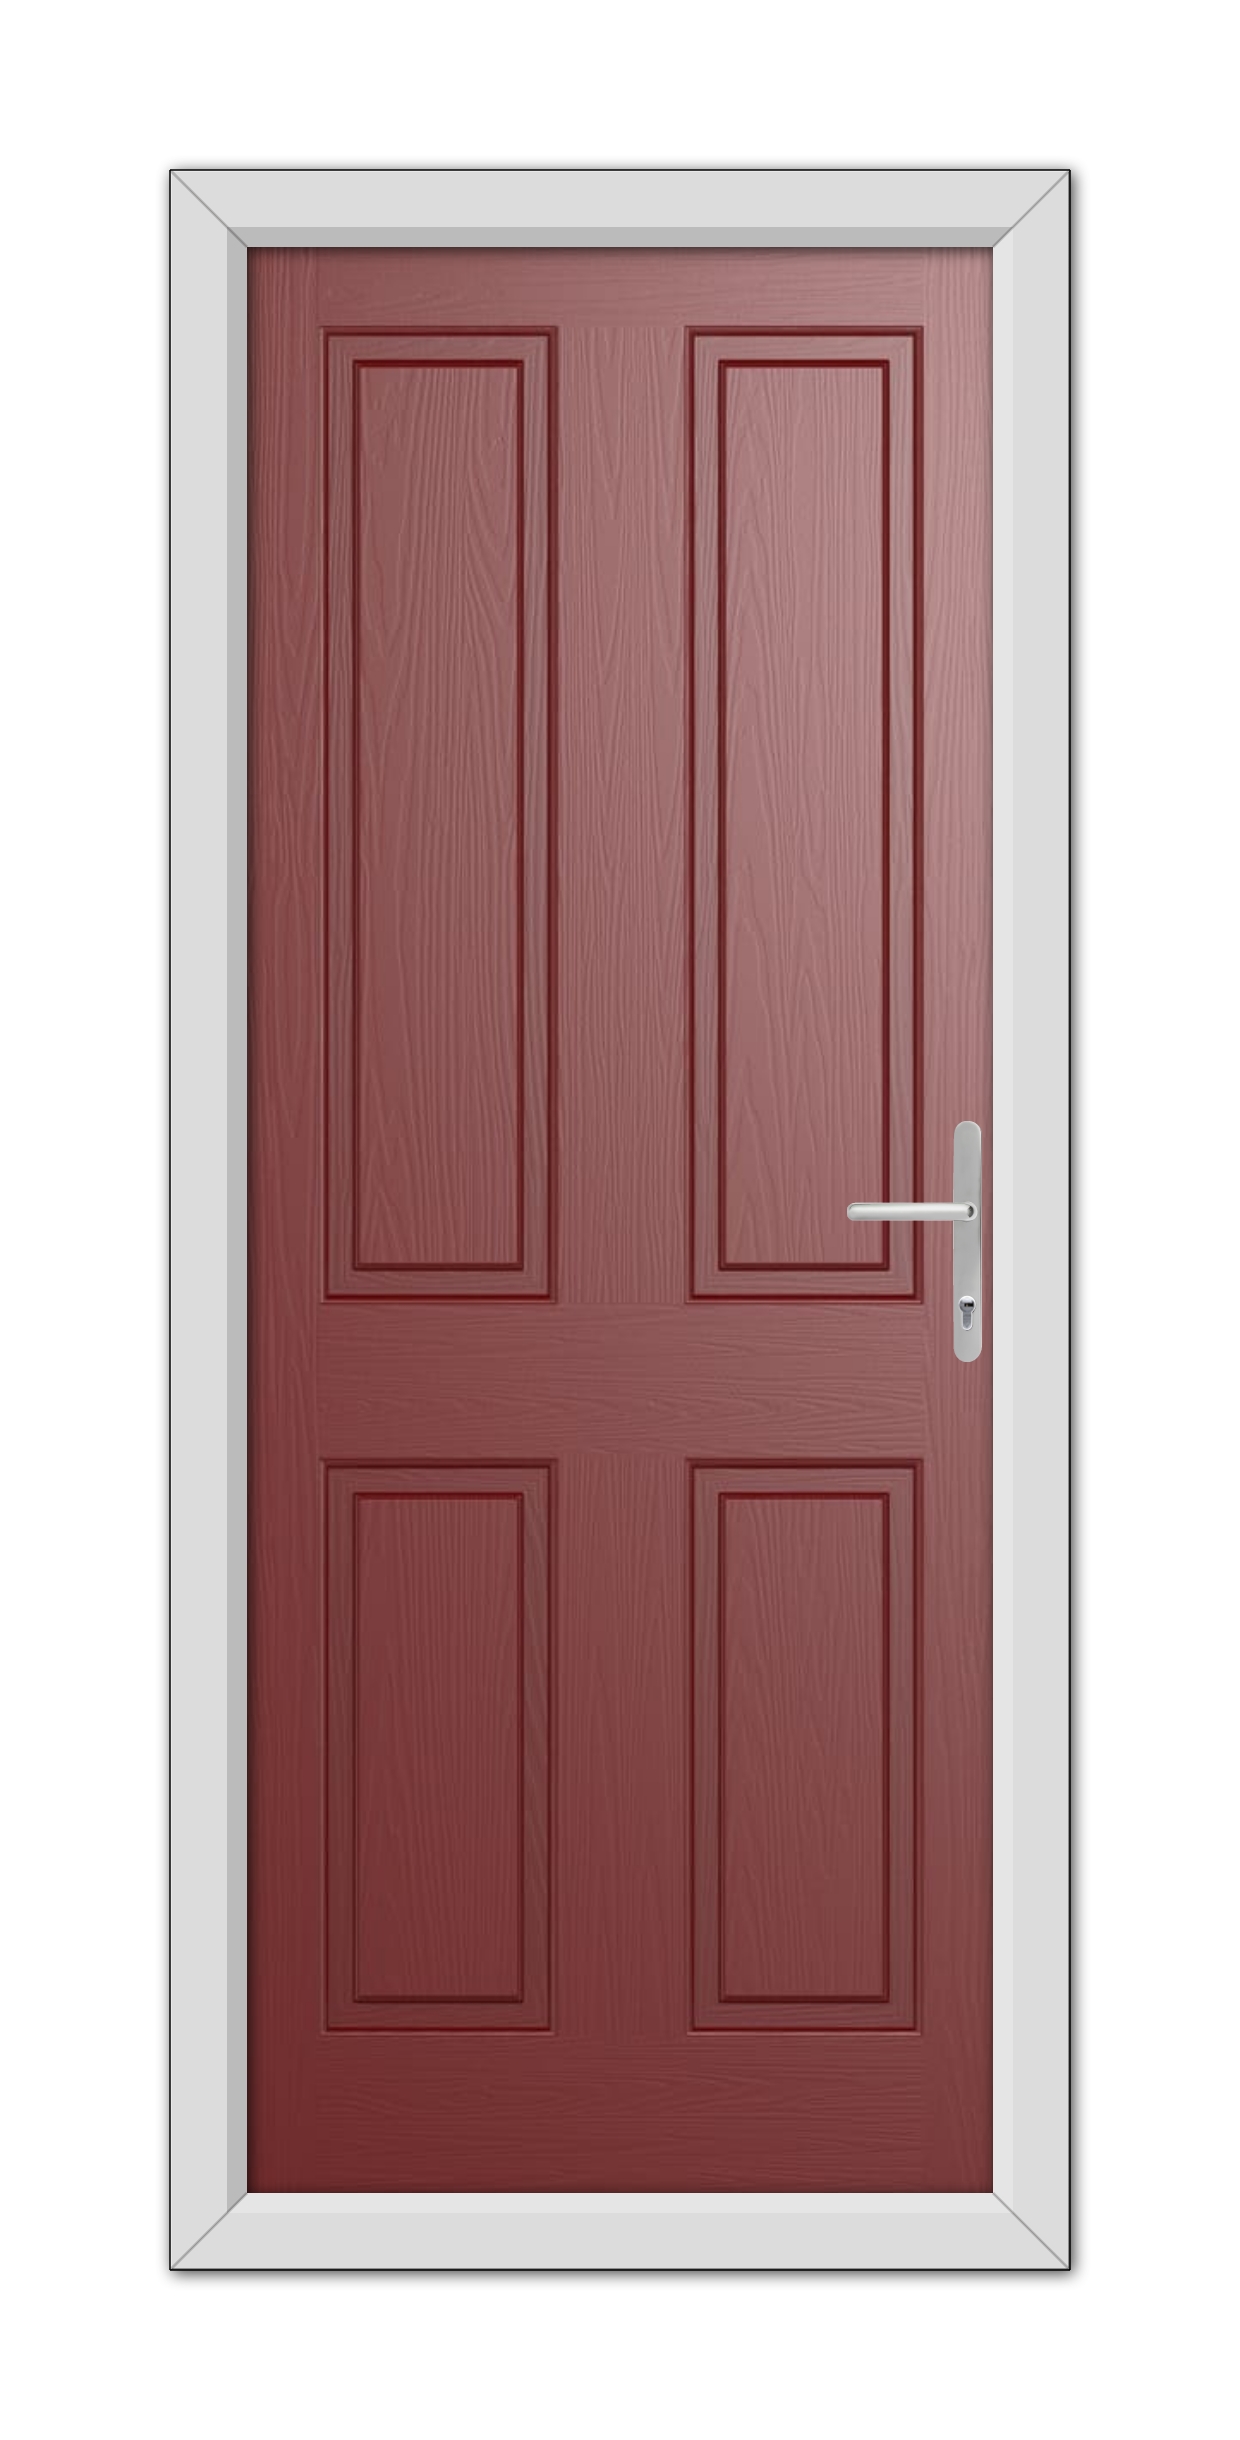 A closed Red Whitmore Solid Composite Door 48mm Timber Core in a white frame with a metal handle on the right side.